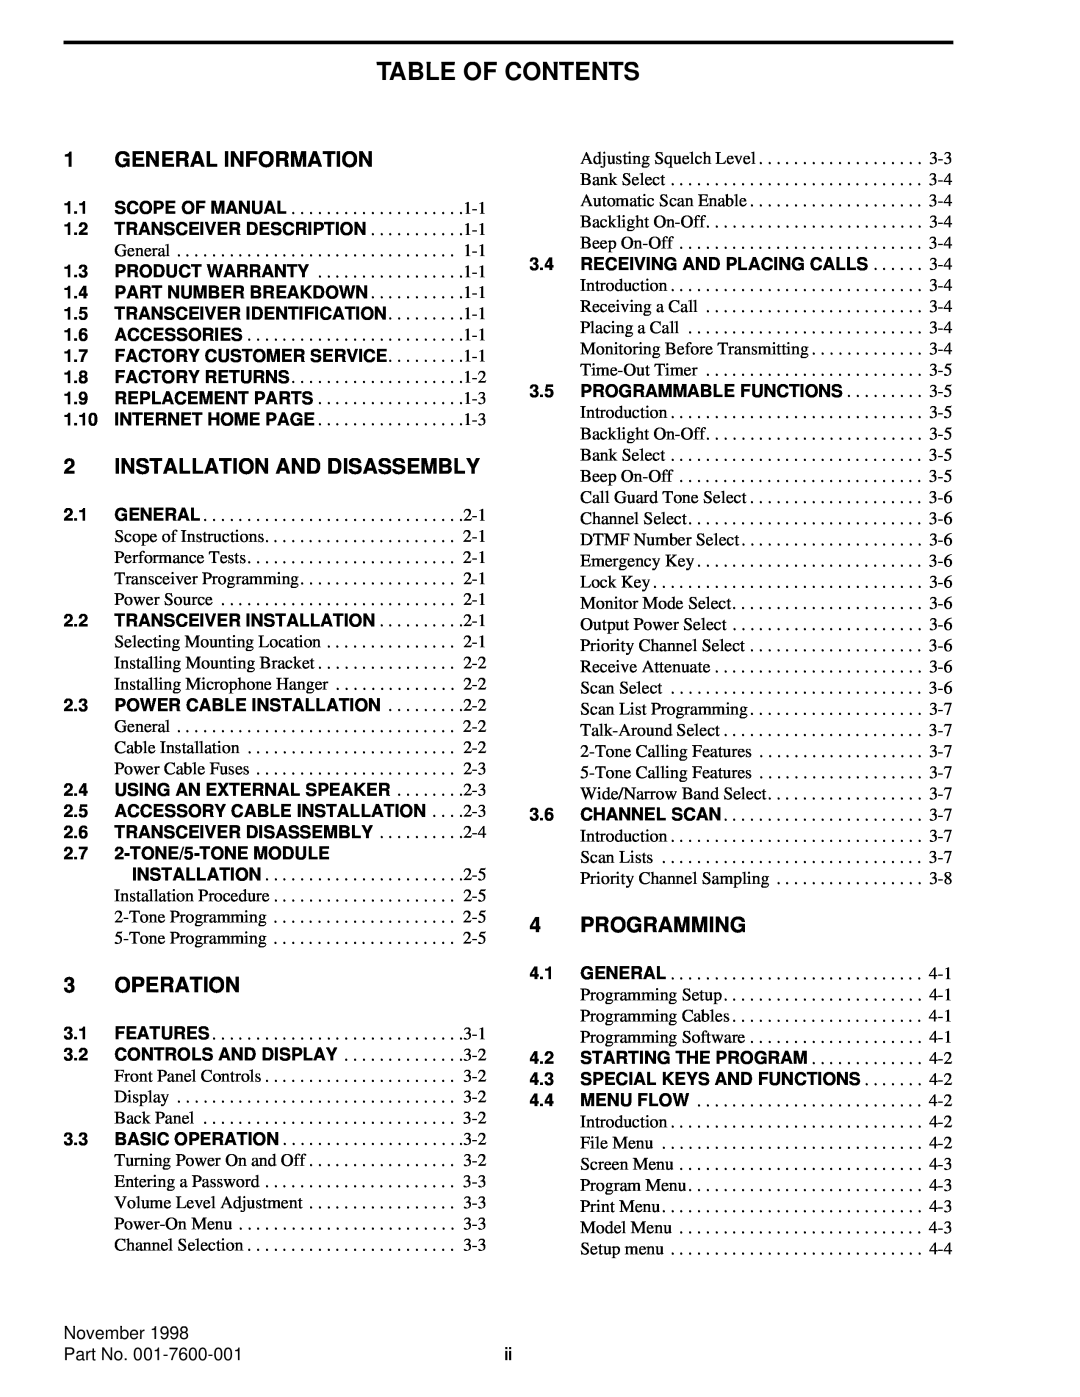 EFJohnson 761X, 764X Table Of Contents, General Information, Installation And Disassembly, Operation, Programming 